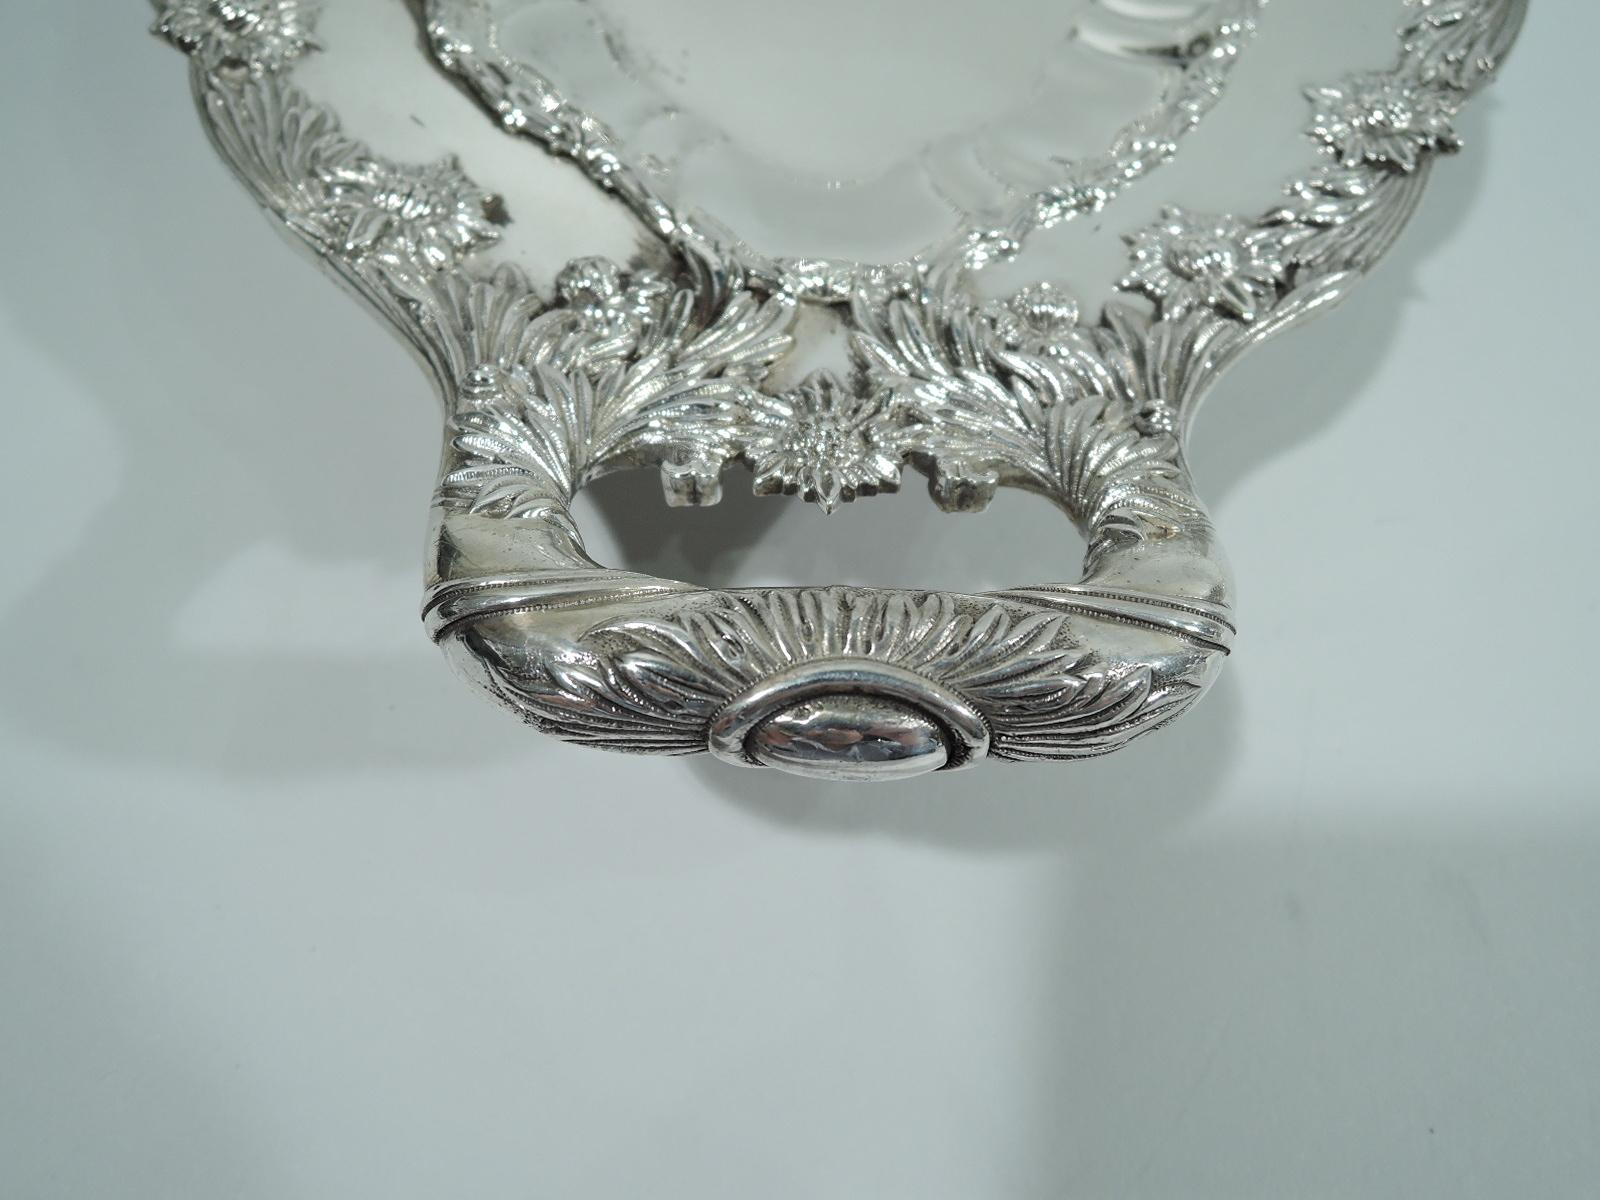 North American Gorgeous Antique Tiffany Chrysanthemum Sterling Silver Serving Dish